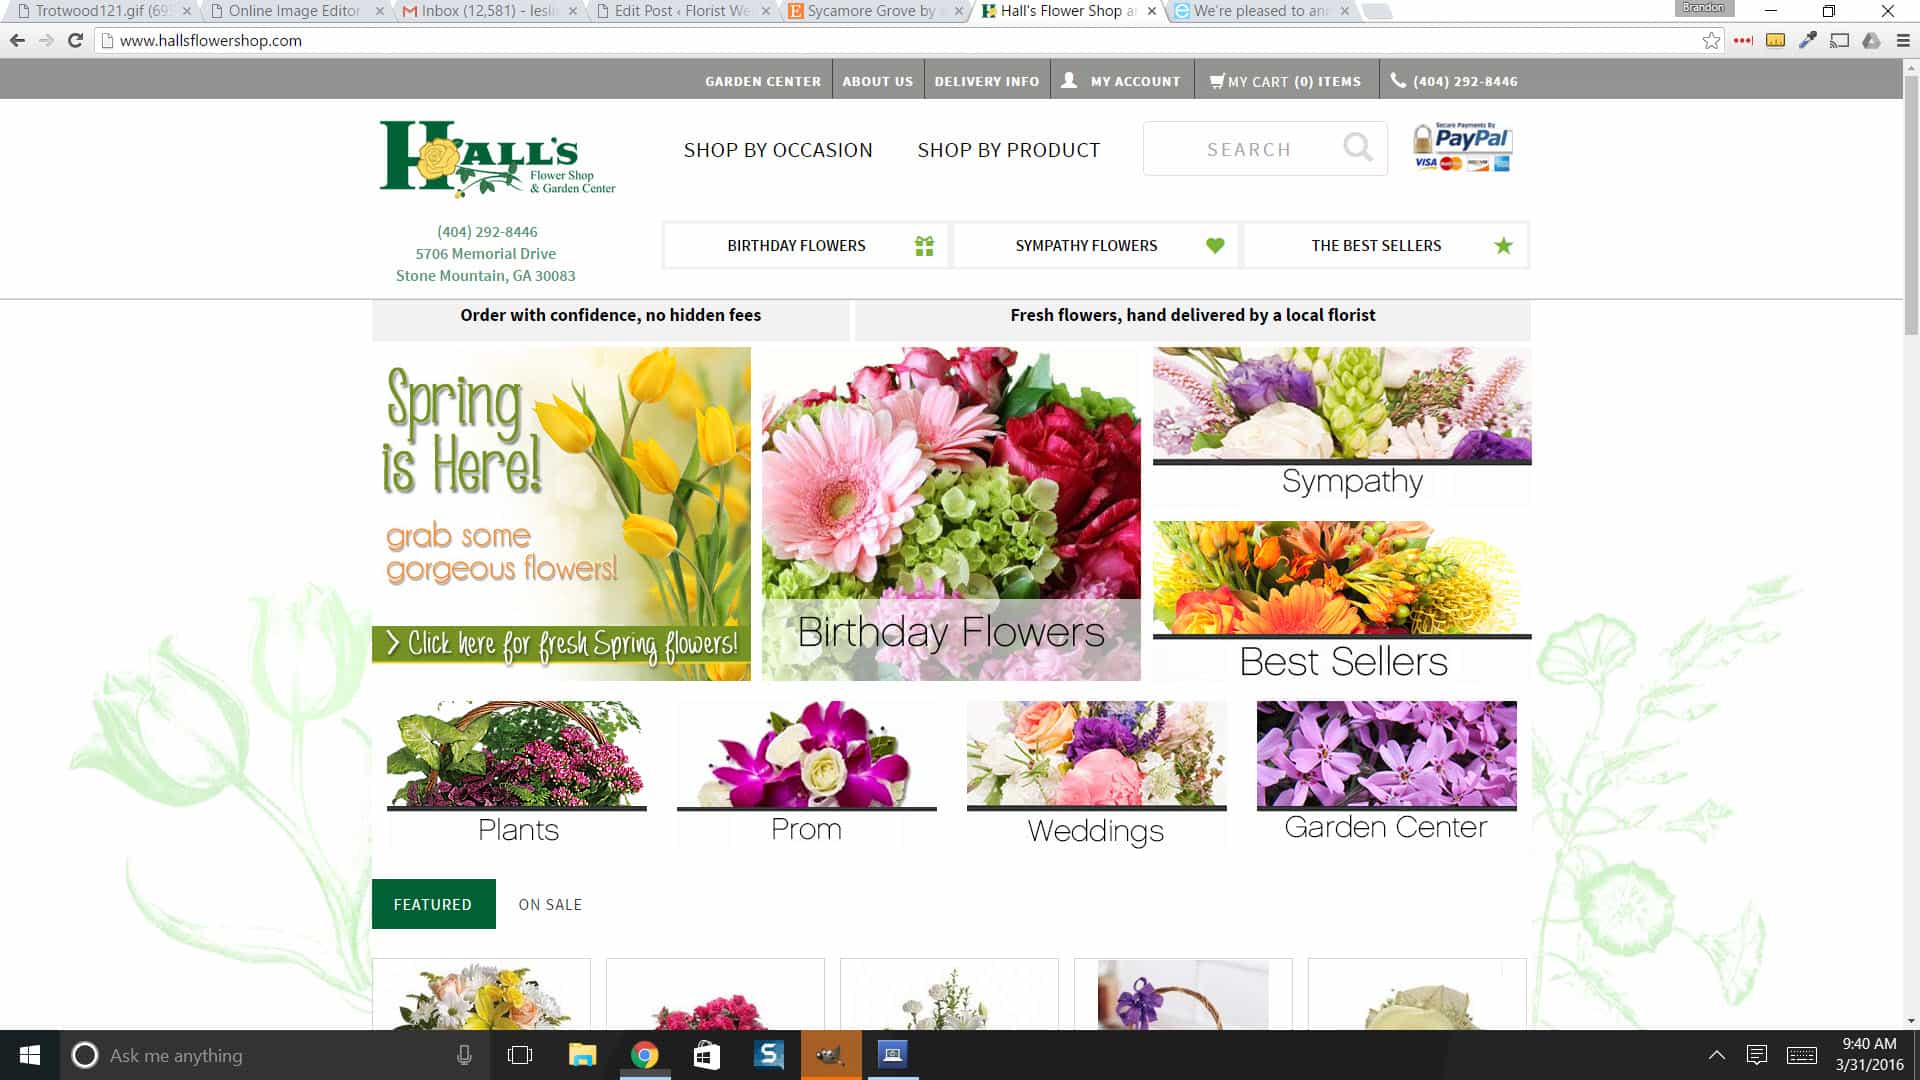 We’re pleased to announce the newest EpicFloirst, Halls Flower Shop!